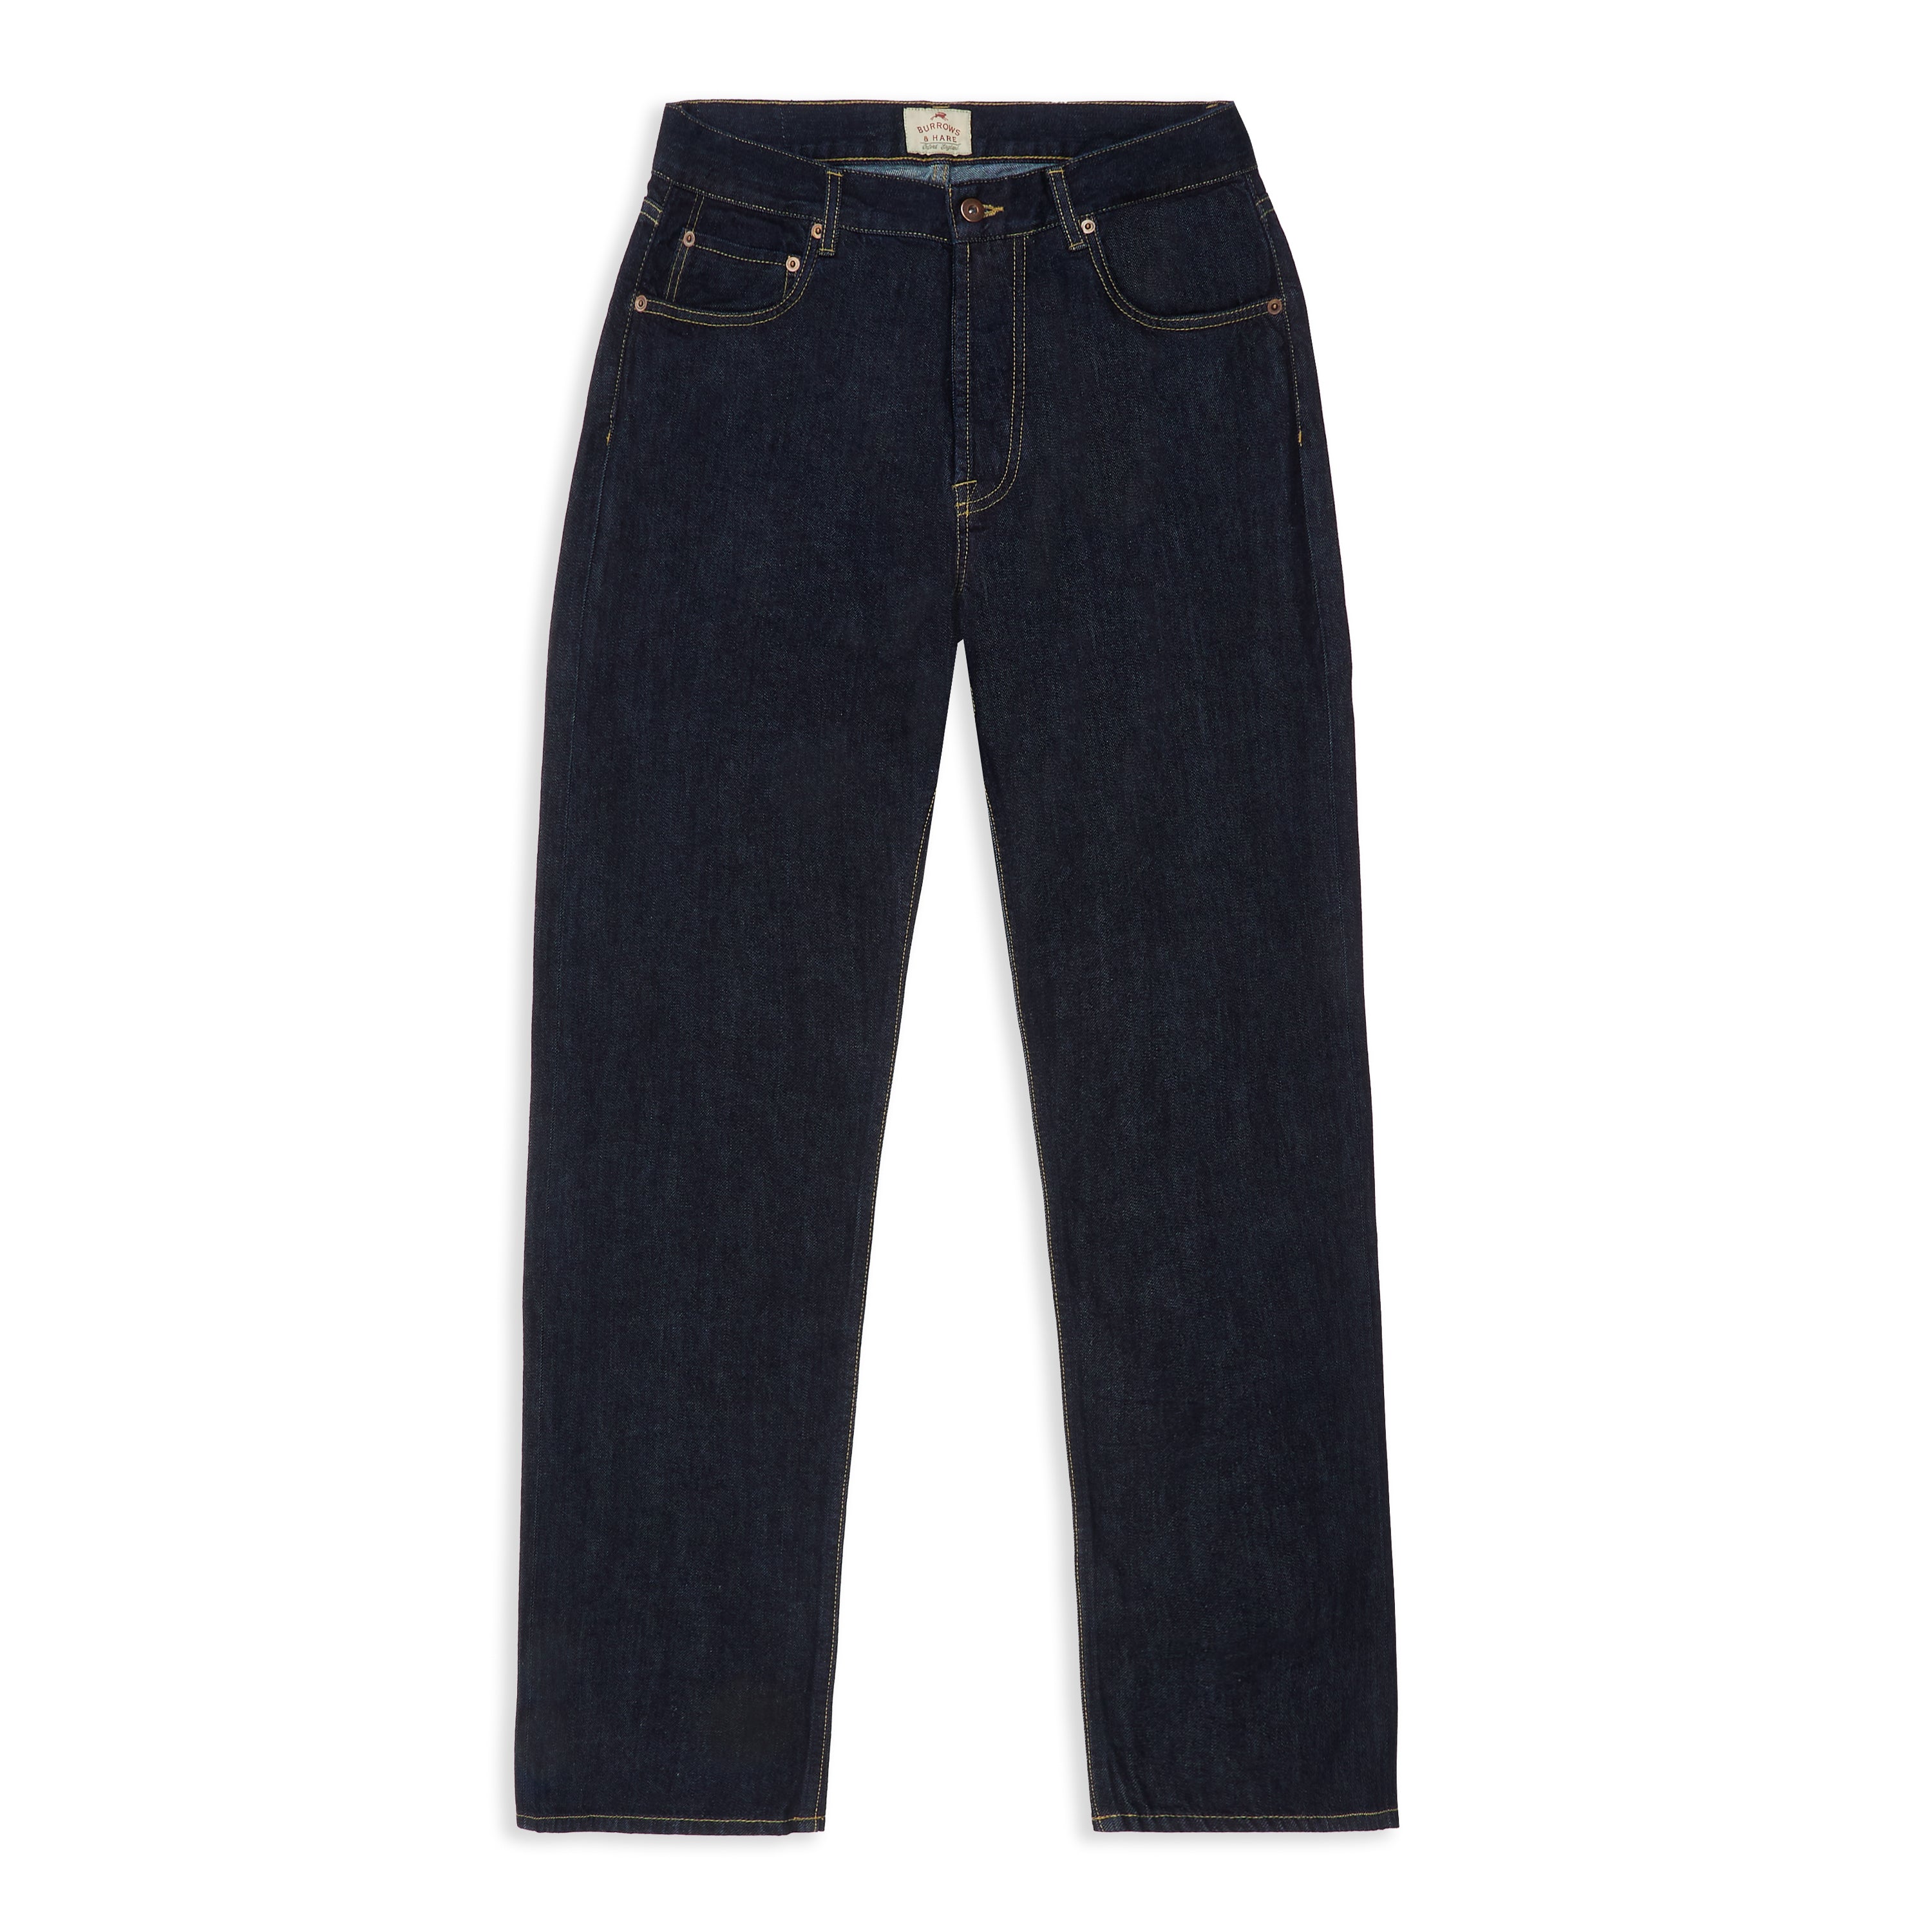 Burrows & Hare  Straight Jeans - Rinse Wash